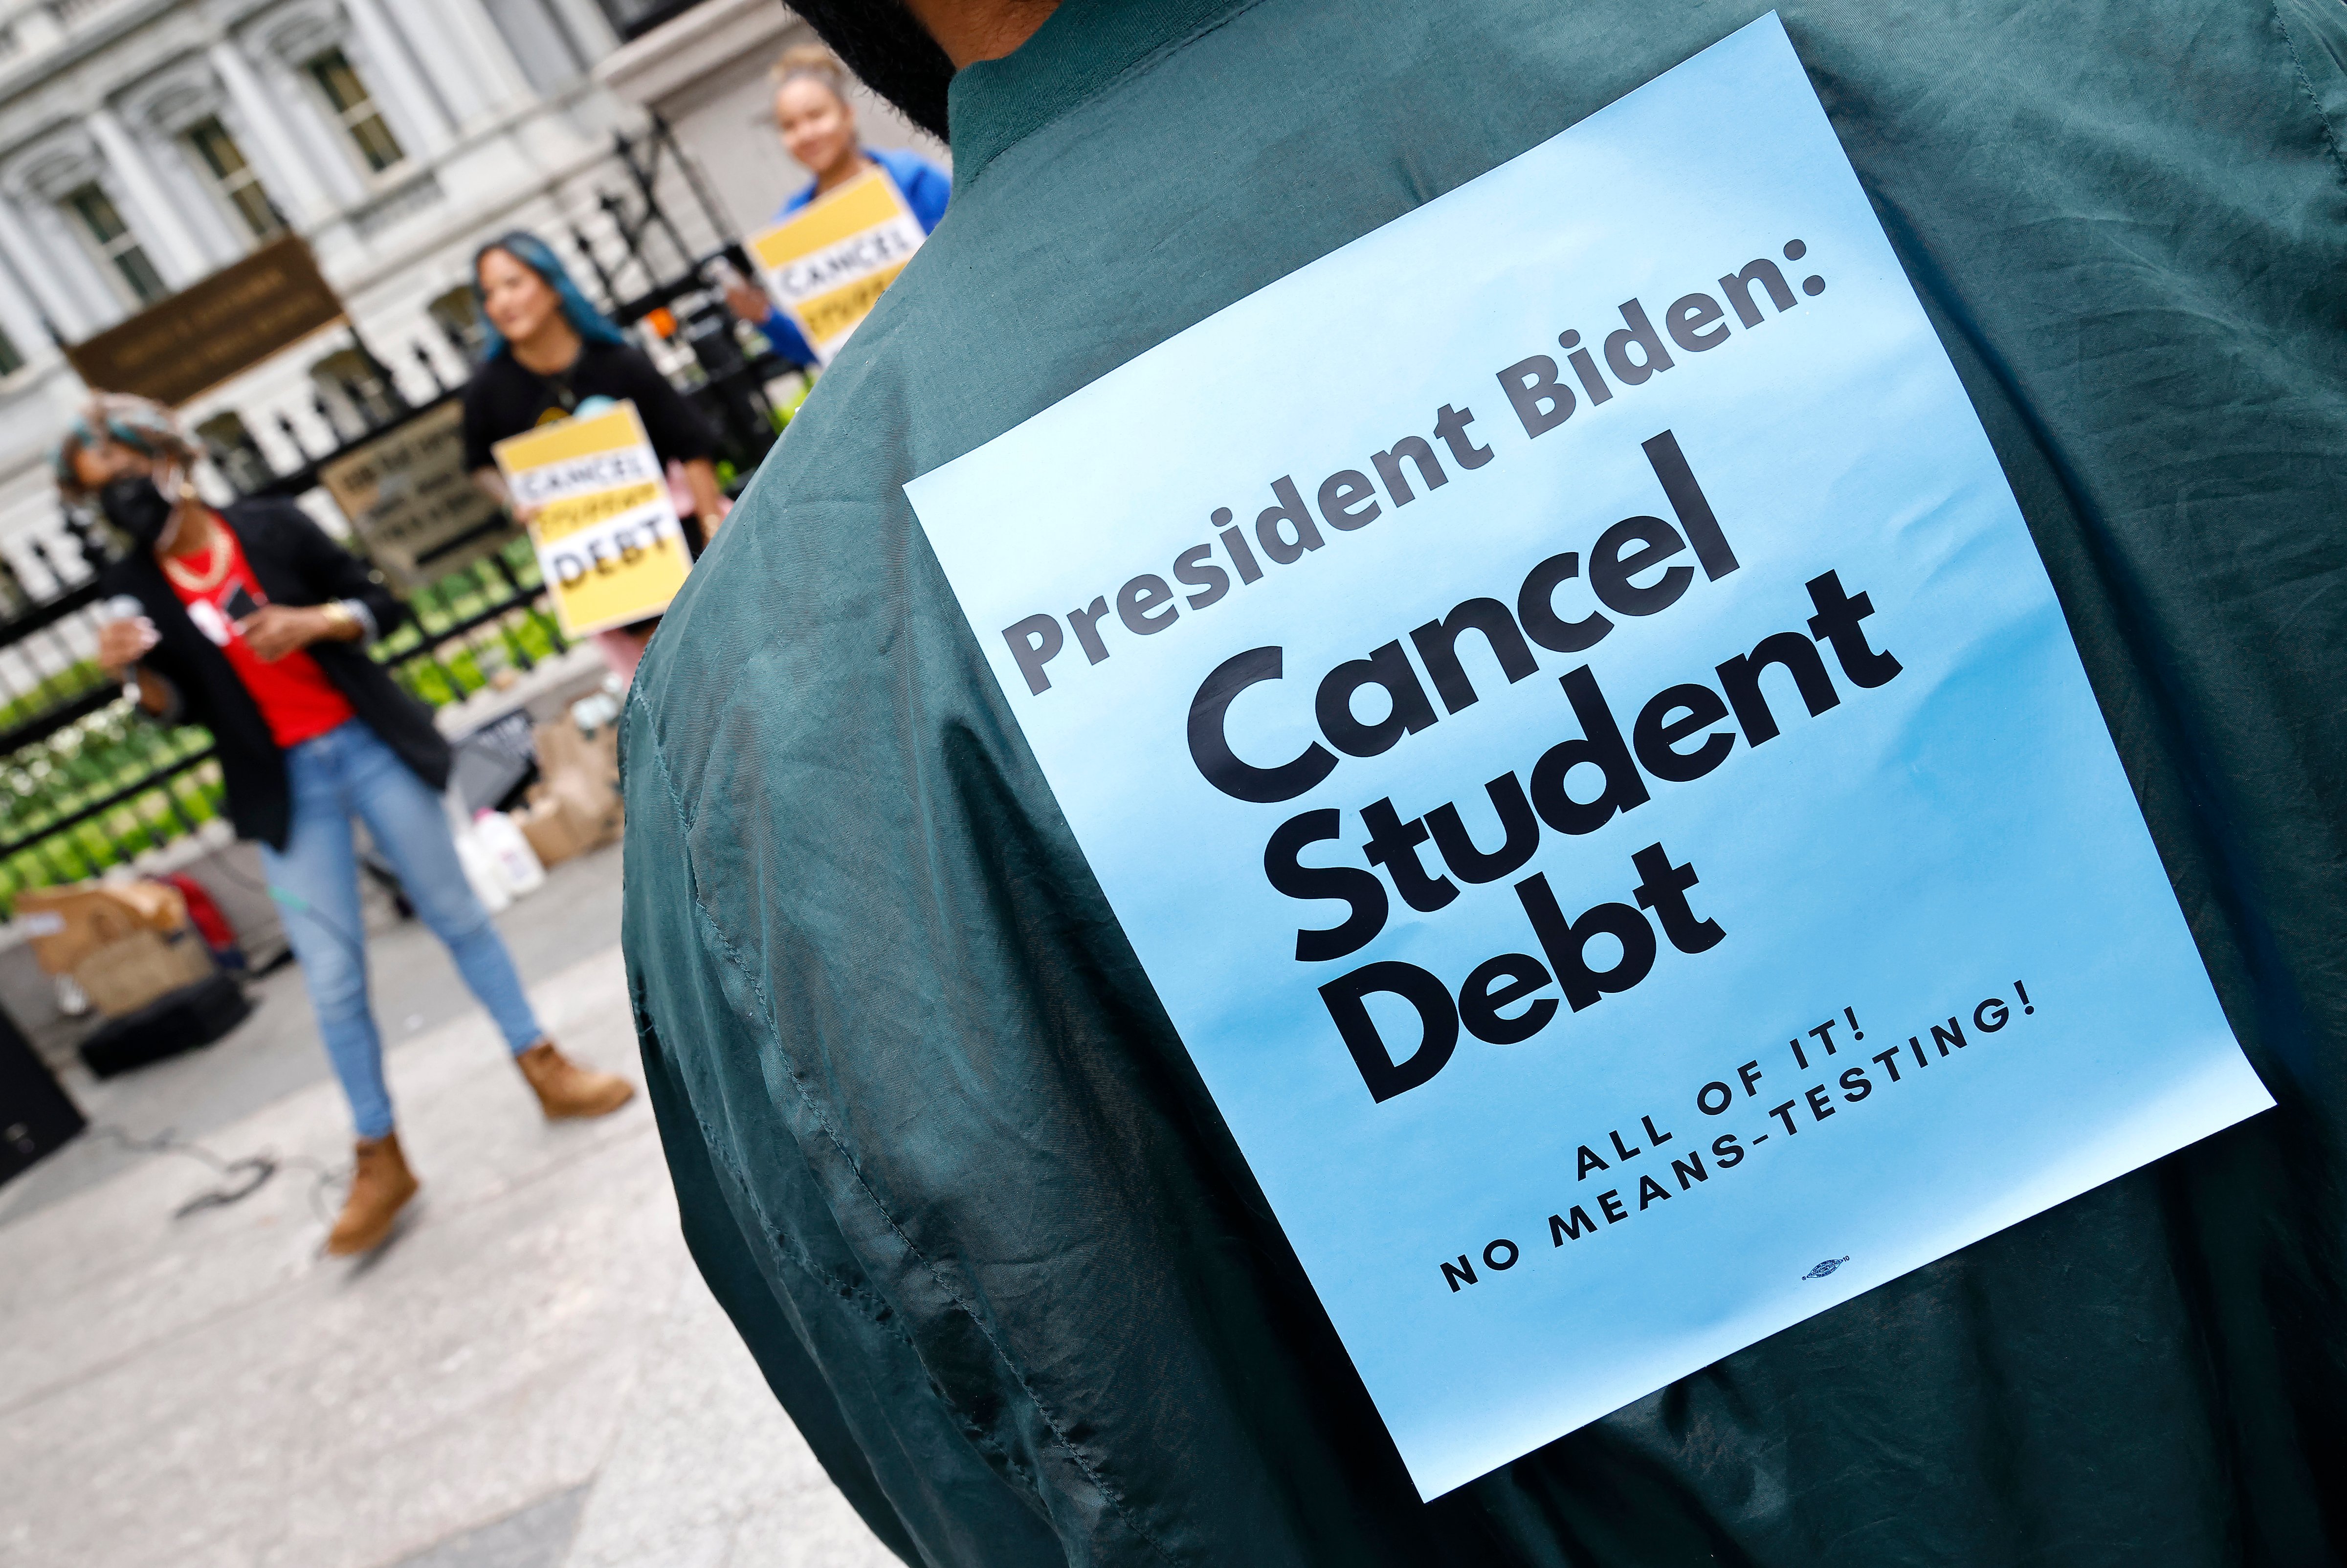 Student loan borrowers gather near the White House to ask President Biden to cancel student debt on May 12, 2022 in Washington, D.C. (Paul Morigi/Getty Images)